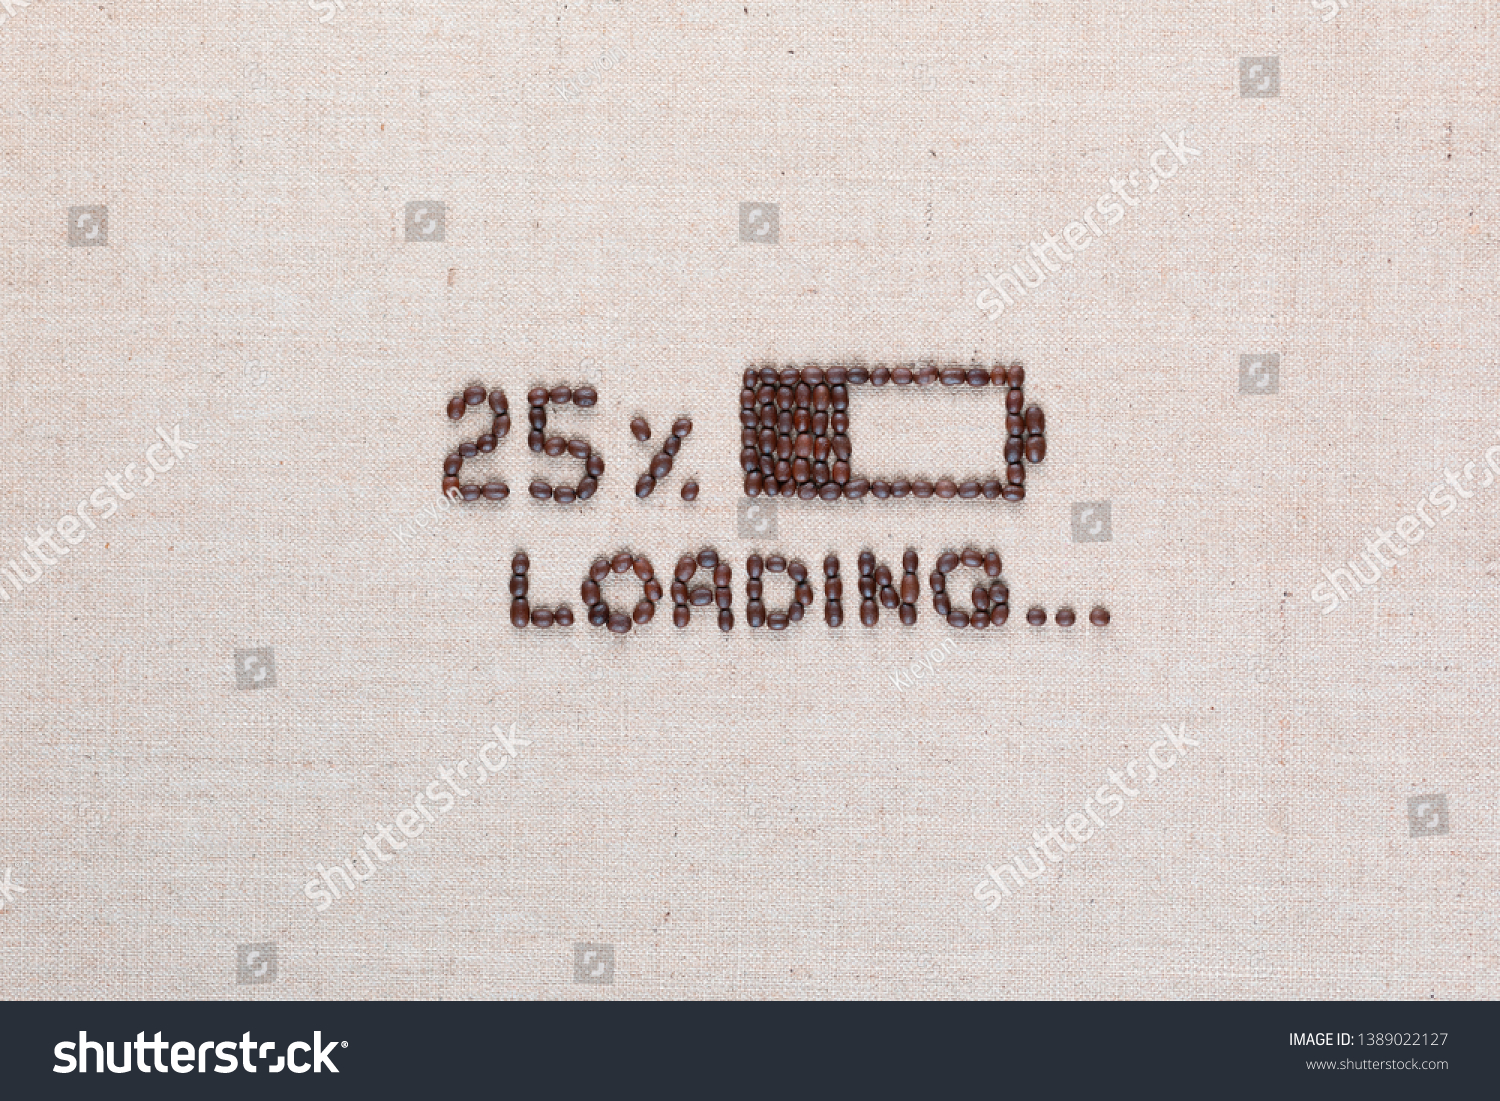 Loading bar with 25 percent progress isolated on linea canvas, shot top view, aligned in center. #1389022127